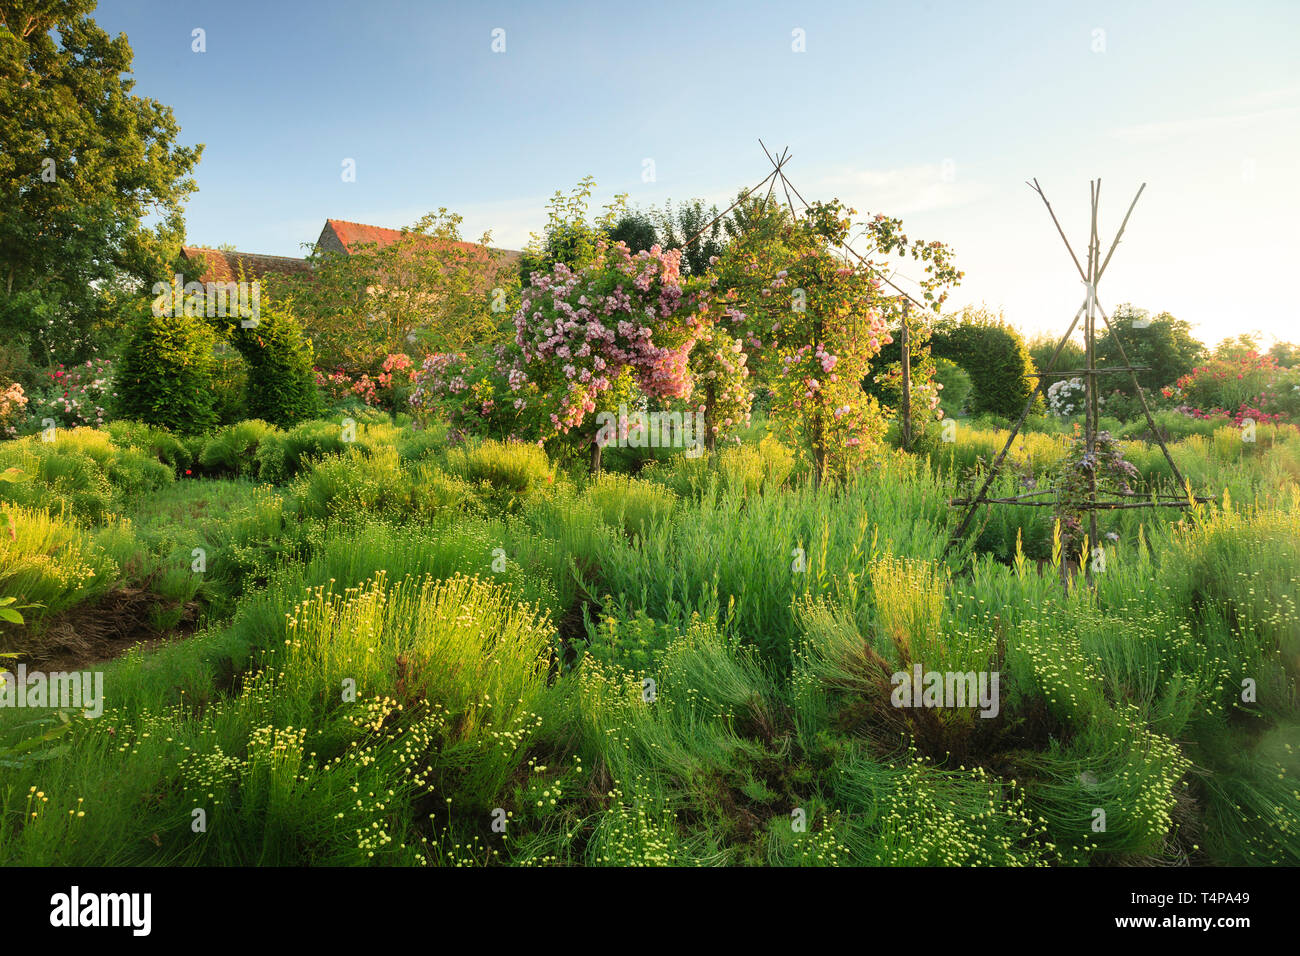 Roquelin’s gardens, Les jardins de Roquelin, France : green Santolina flowerbed (Santolina rosmarinifolia) with in the center a wooden gloriette and t Stock Photo